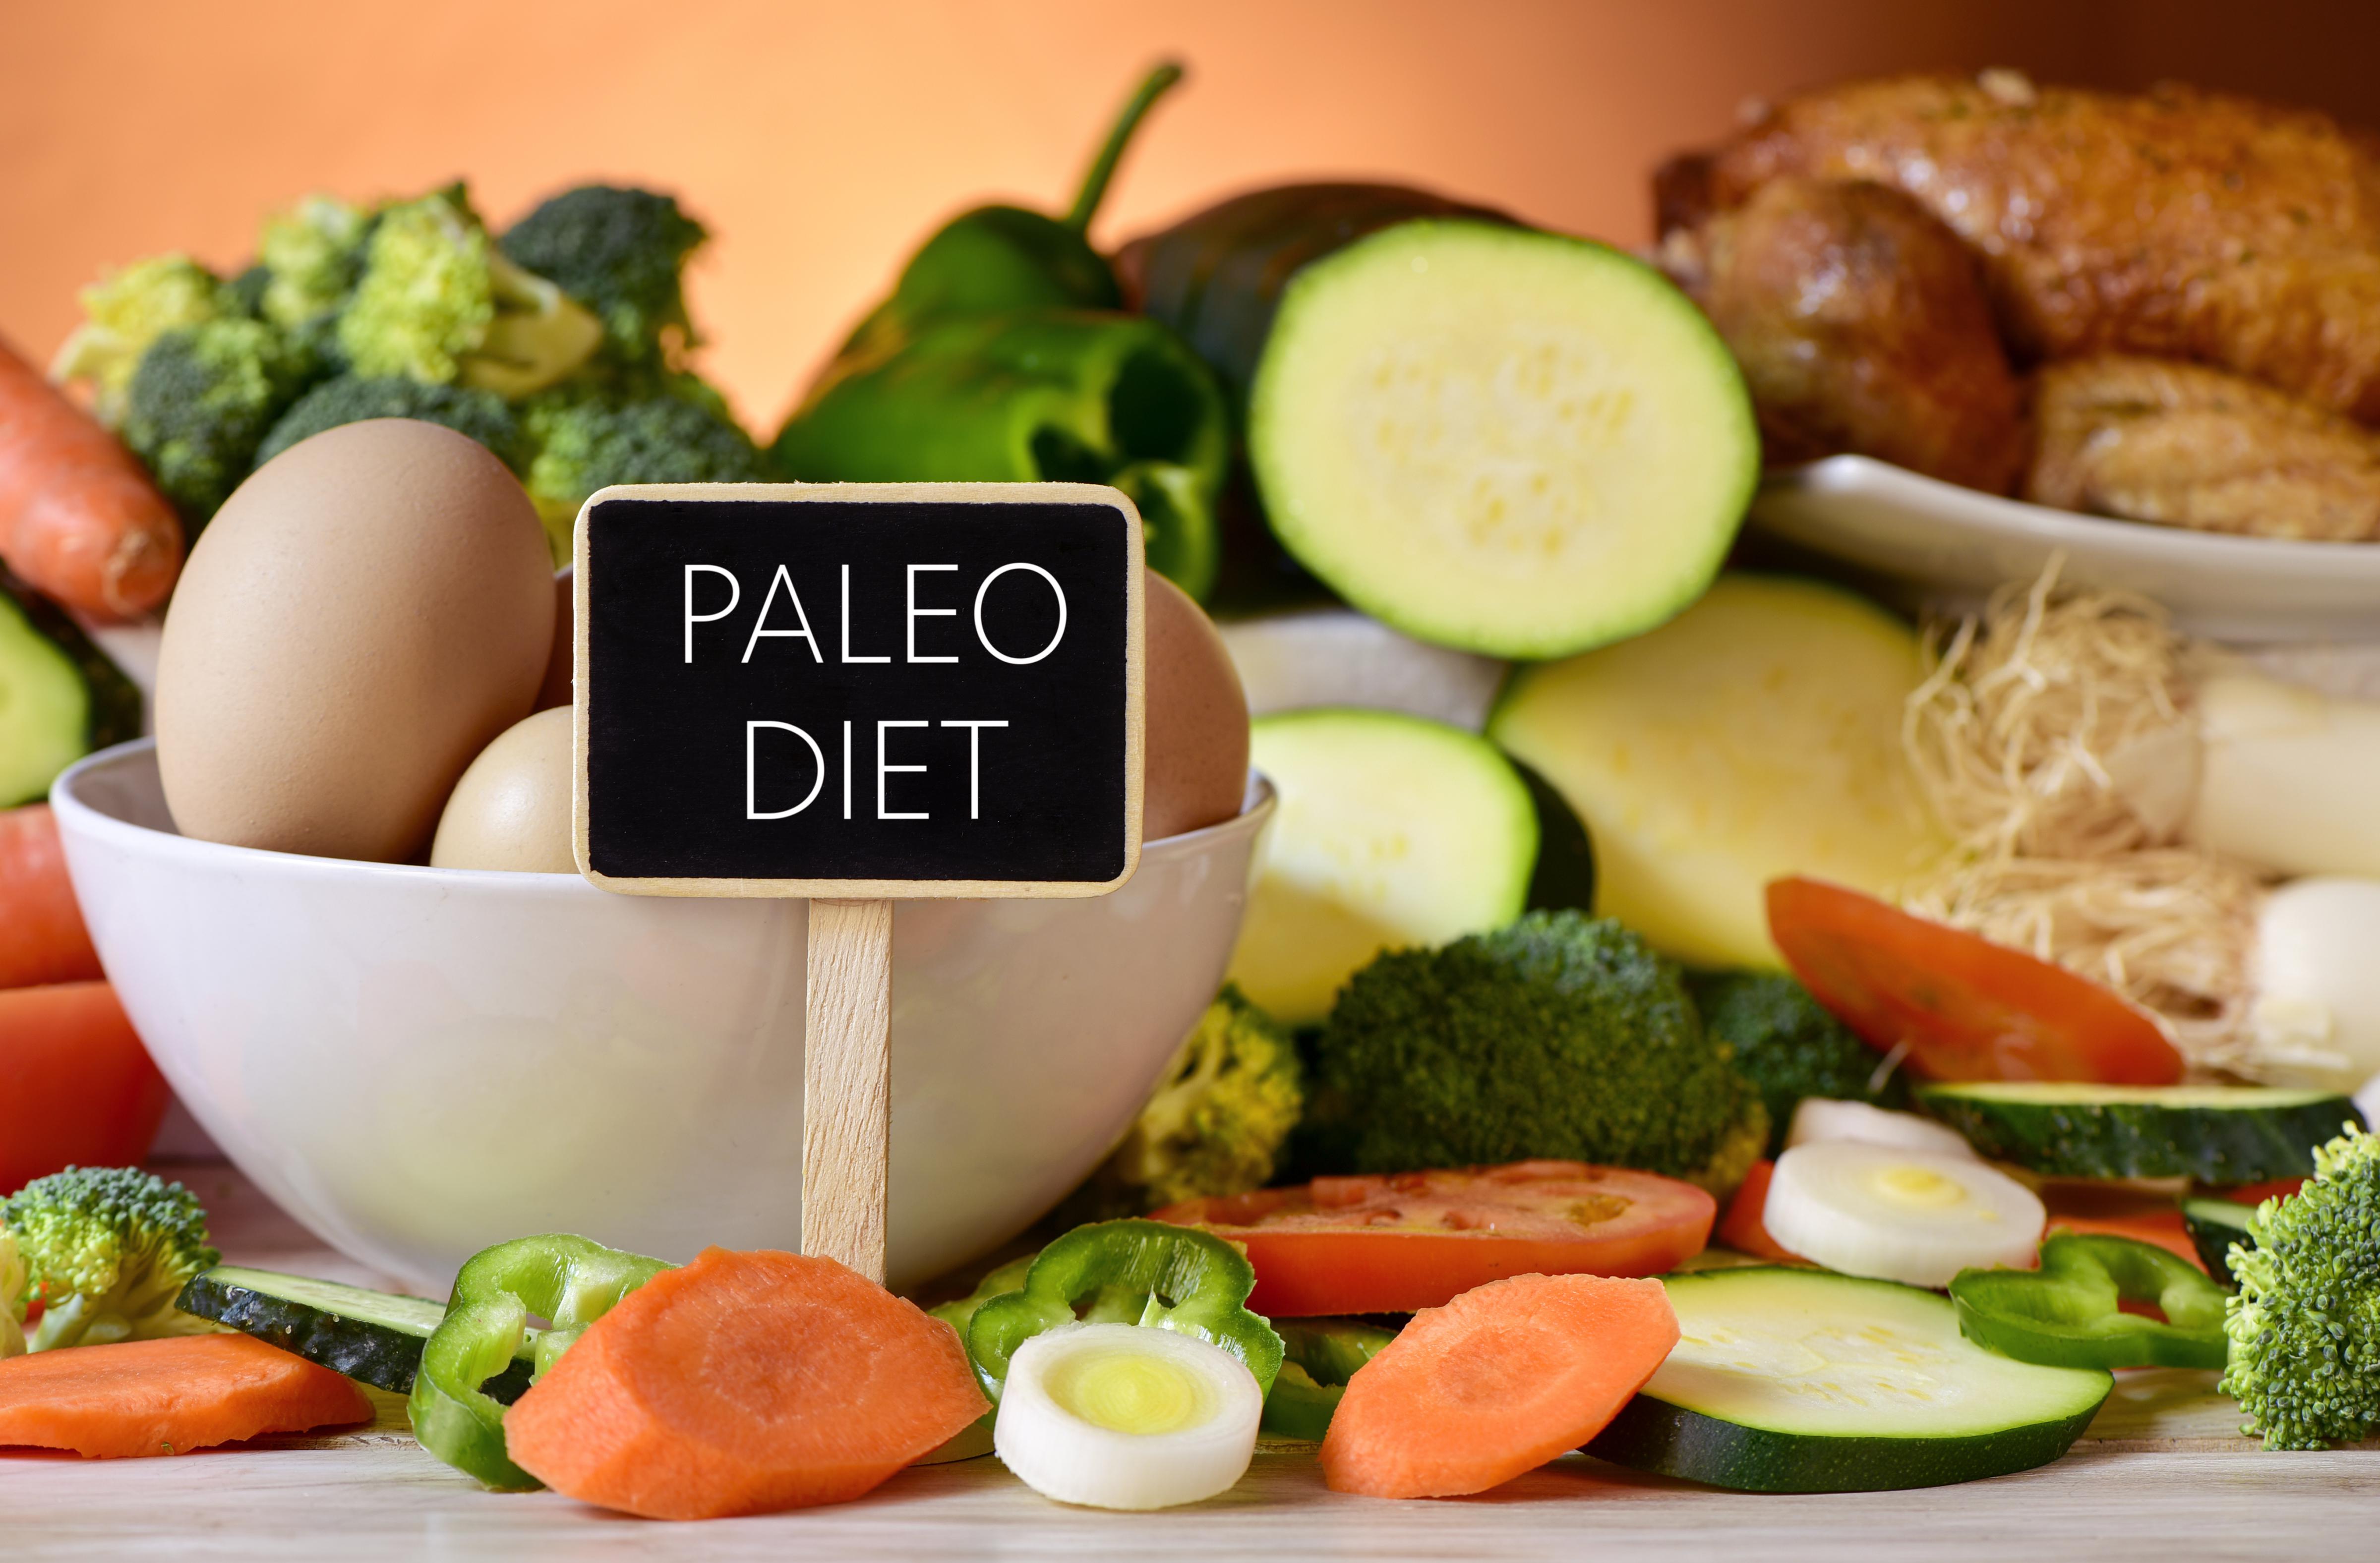  The Paleo Diet involves only eating foods which were available in caveman times